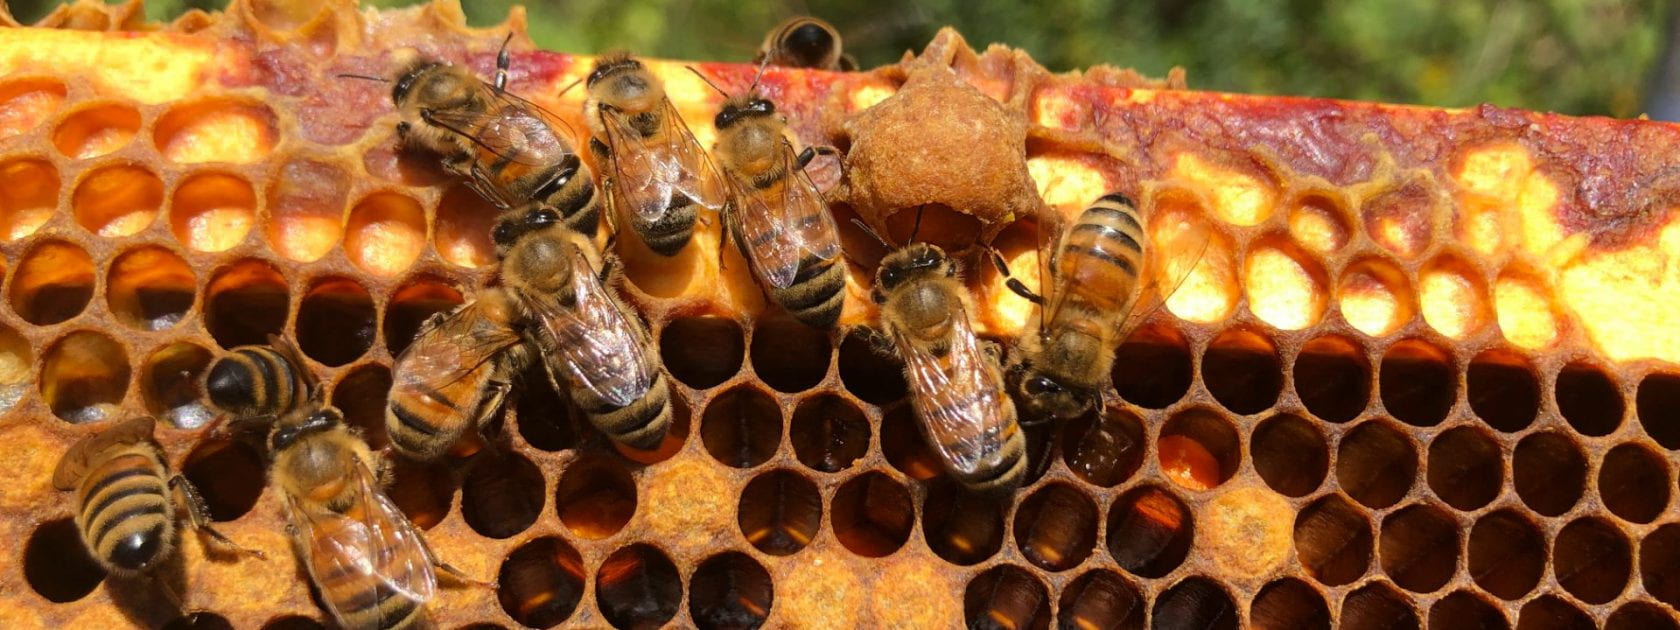 Picture of zoomed in hive frame, with several honeybees crawling within the frame